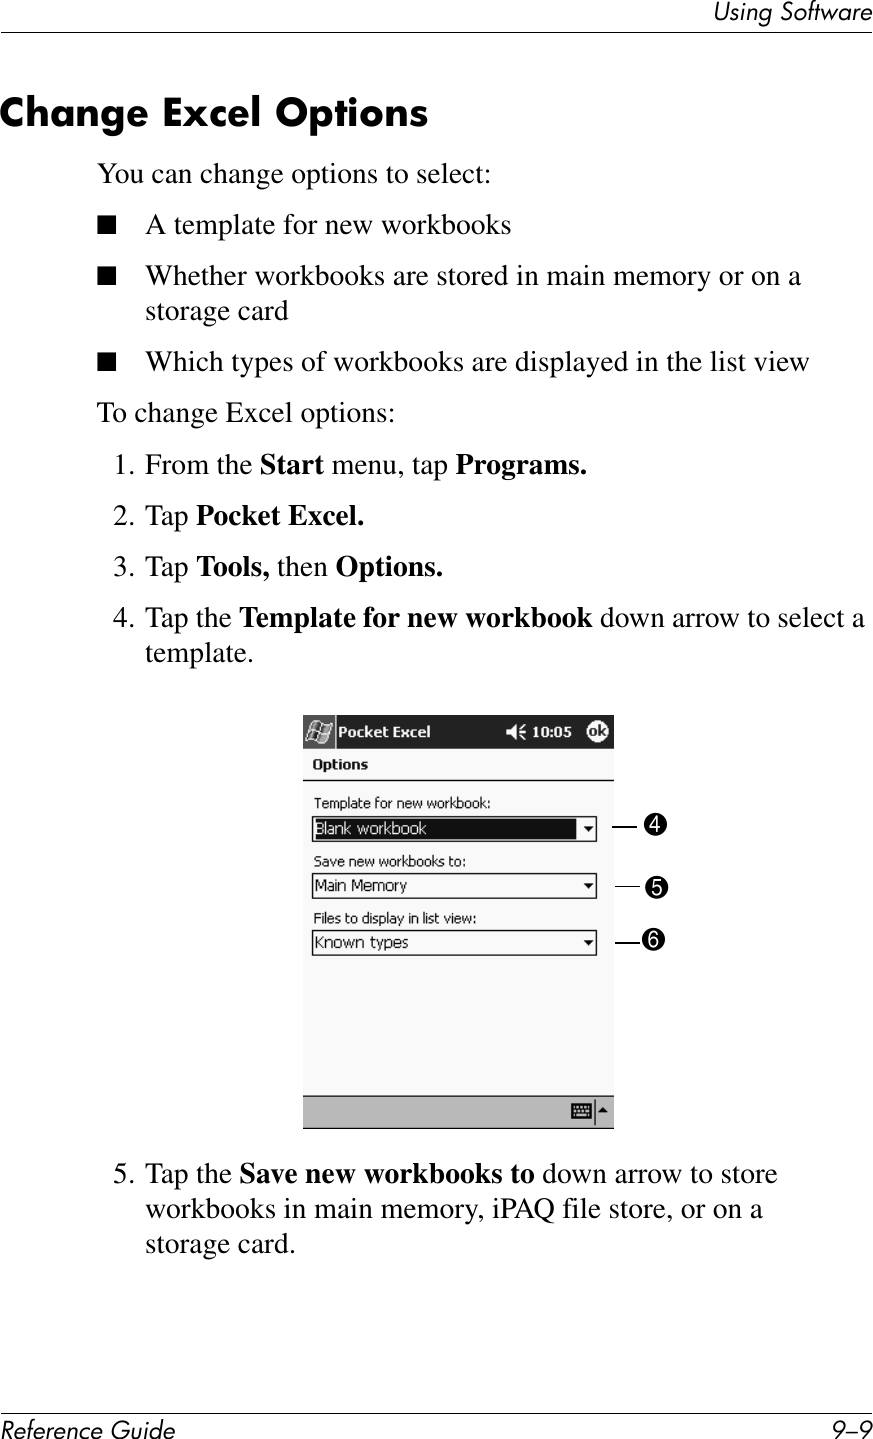 UL*%2&apos;37#1V4$&quot;!&quot;#&quot;$&quot;%&amp;&quot;&apos;()*+&quot; H/H2?;$&apos;&quot;&amp;^Q%&quot;@&amp;5F7)6$8You can change options to select:■A template for new workbooks■Whether workbooks are stored in main memory or on a storage card■Which types of workbooks are displayed in the list viewTo change Excel options:1. From the Start menu, tap Programs.2. Tap Pocket Excel.3. Tap Tools, then Options.4. Tap the Template for new workbook down arrow to select a template.5. Tap the Save new workbooks to down arrow to store workbooks in main memory, iPAQ file store, or on a storage card.456